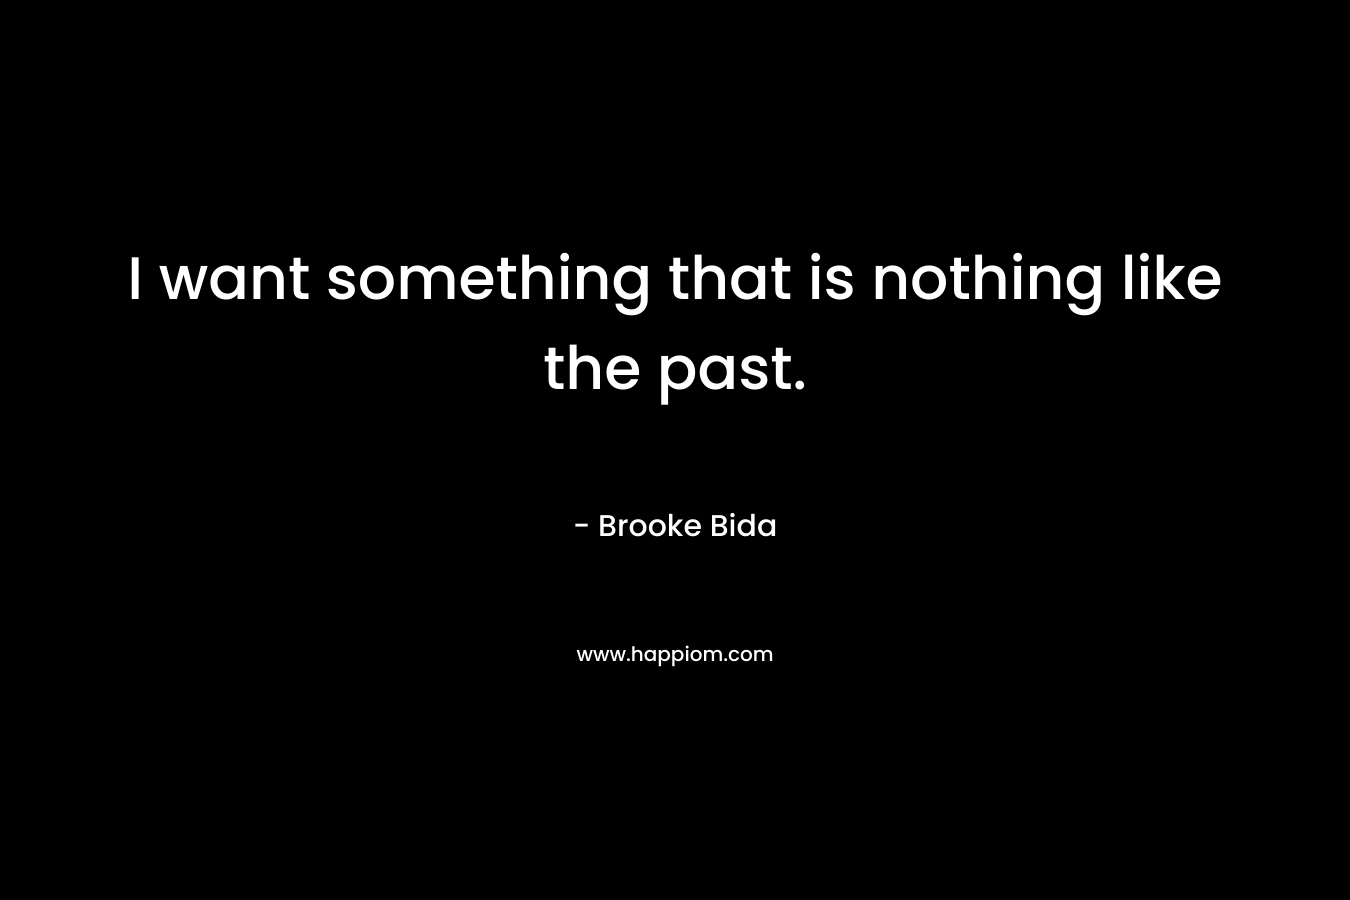 I want something that is nothing like the past.